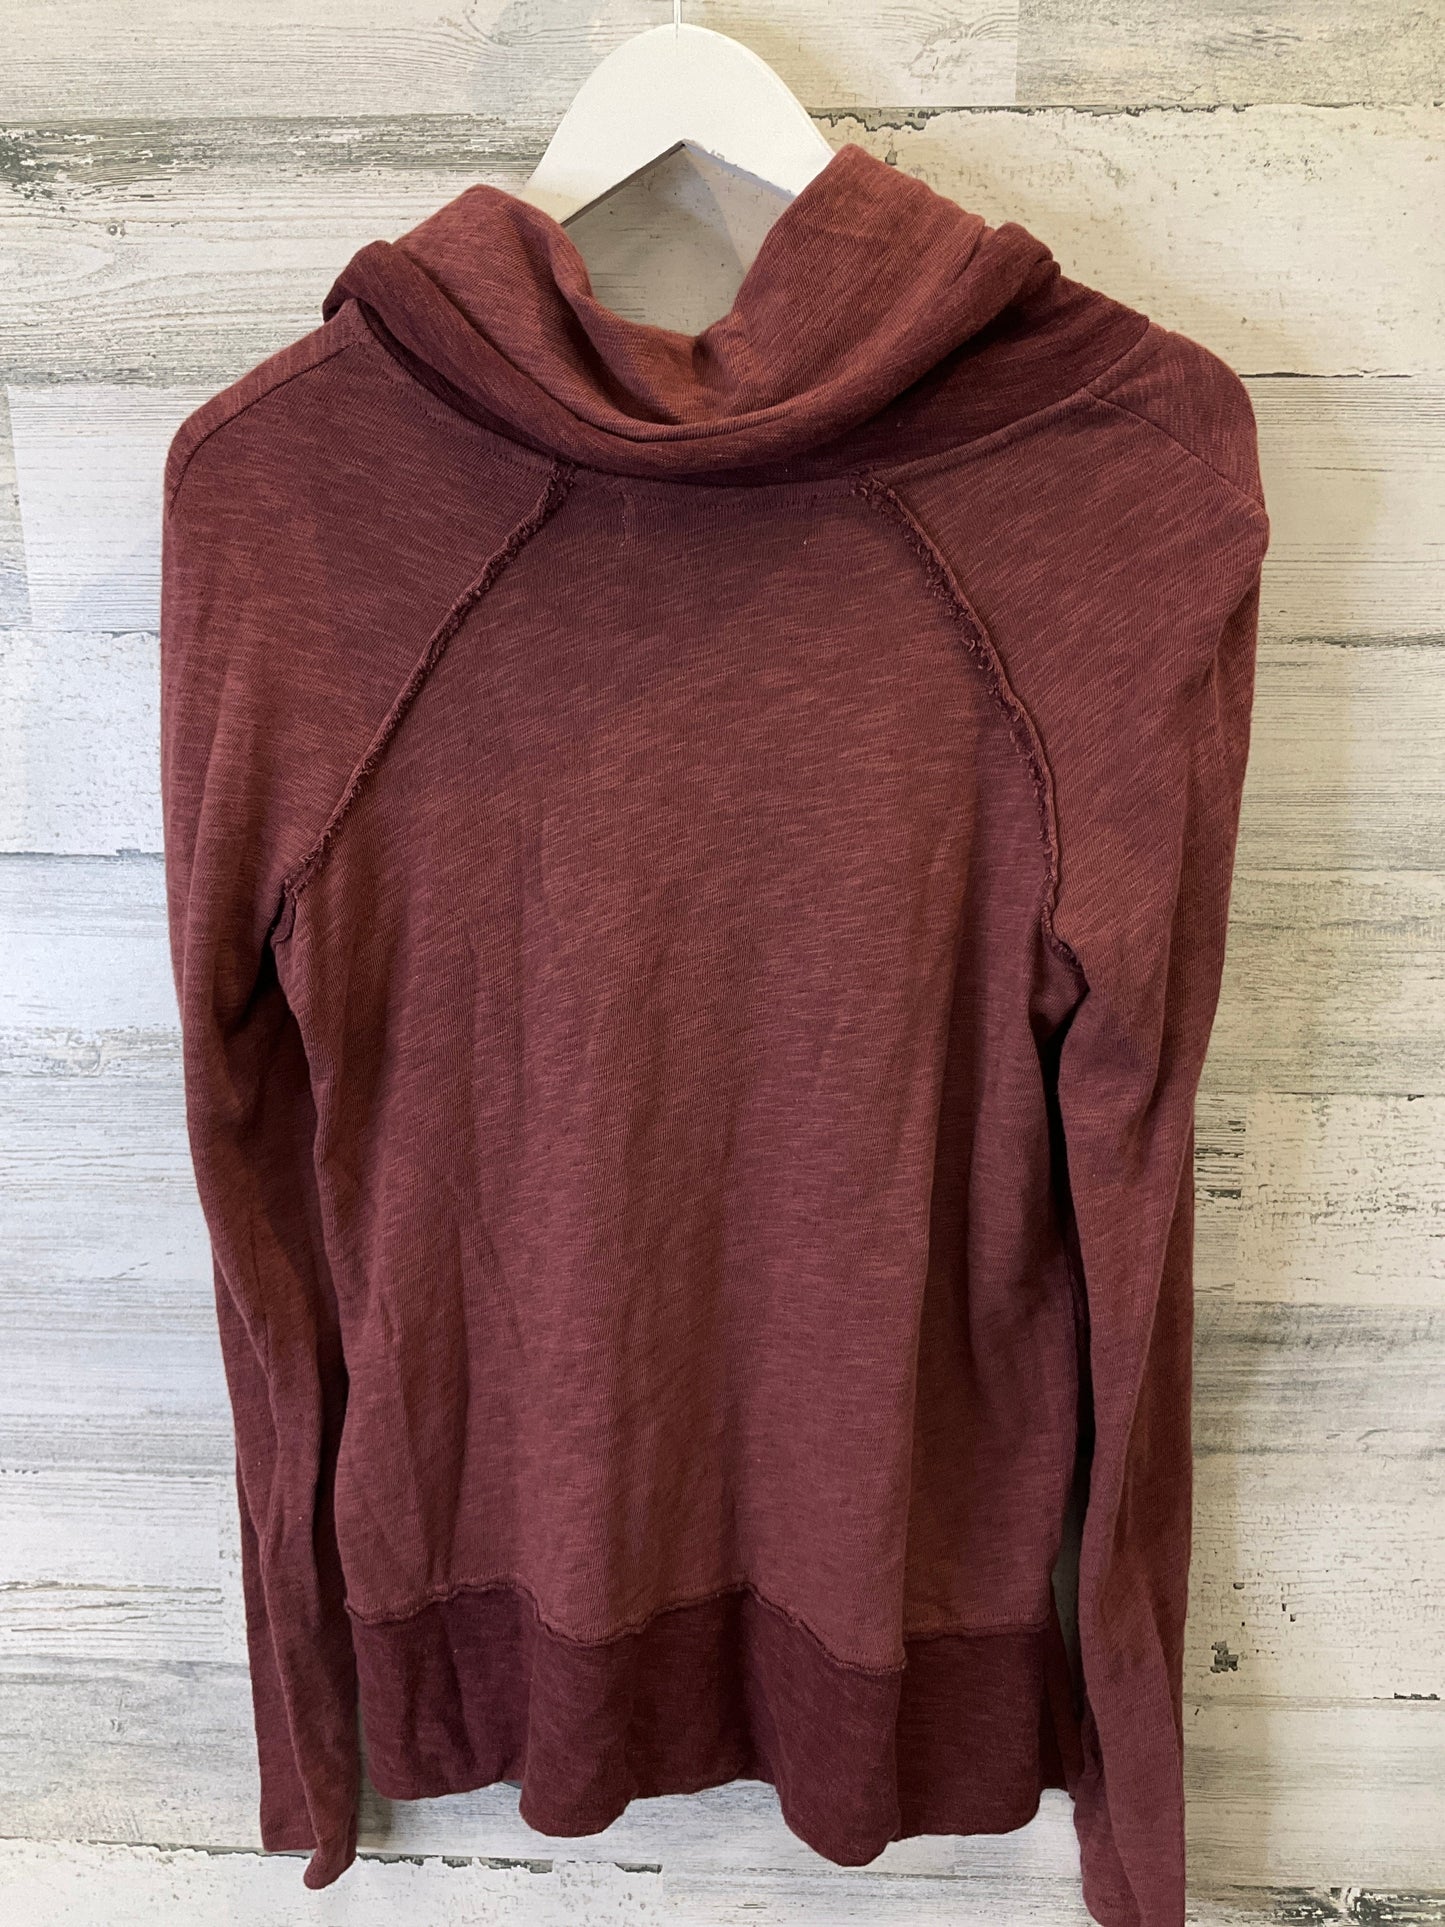 Red Top Long Sleeve Free People, Size S